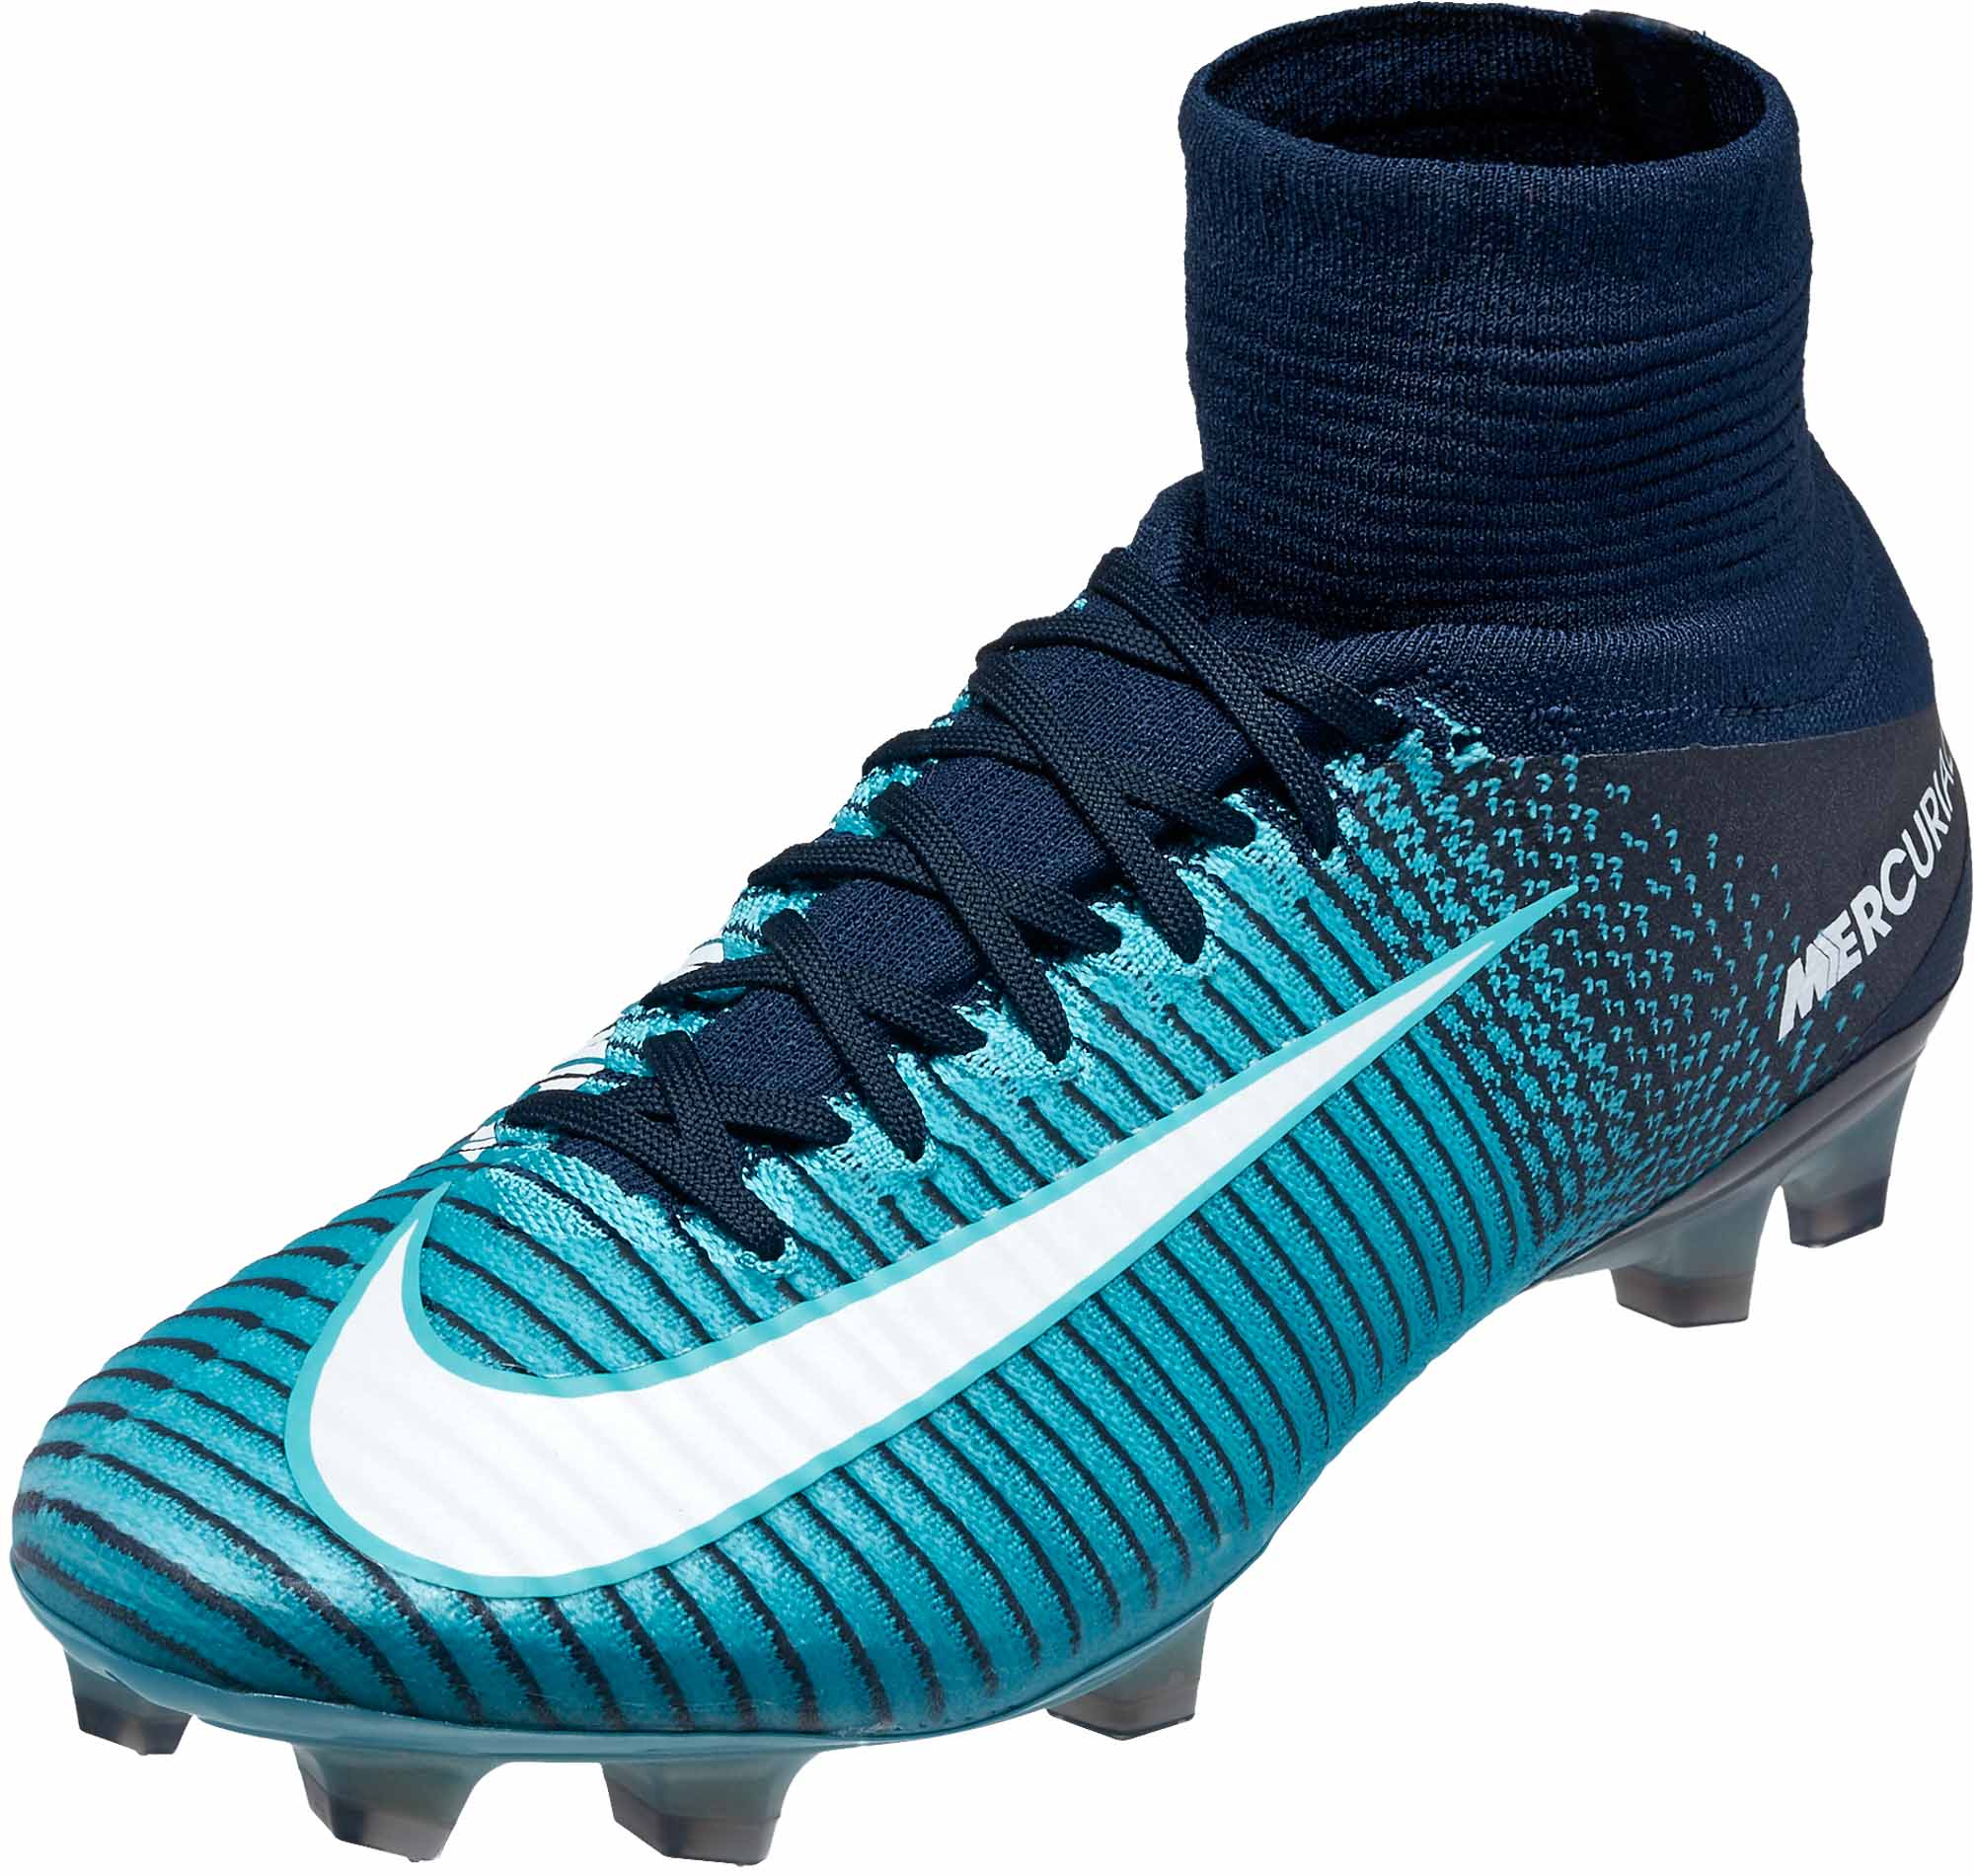 Schuldig Raad grot Nike Mercurial Superfly V - Obsidian and White